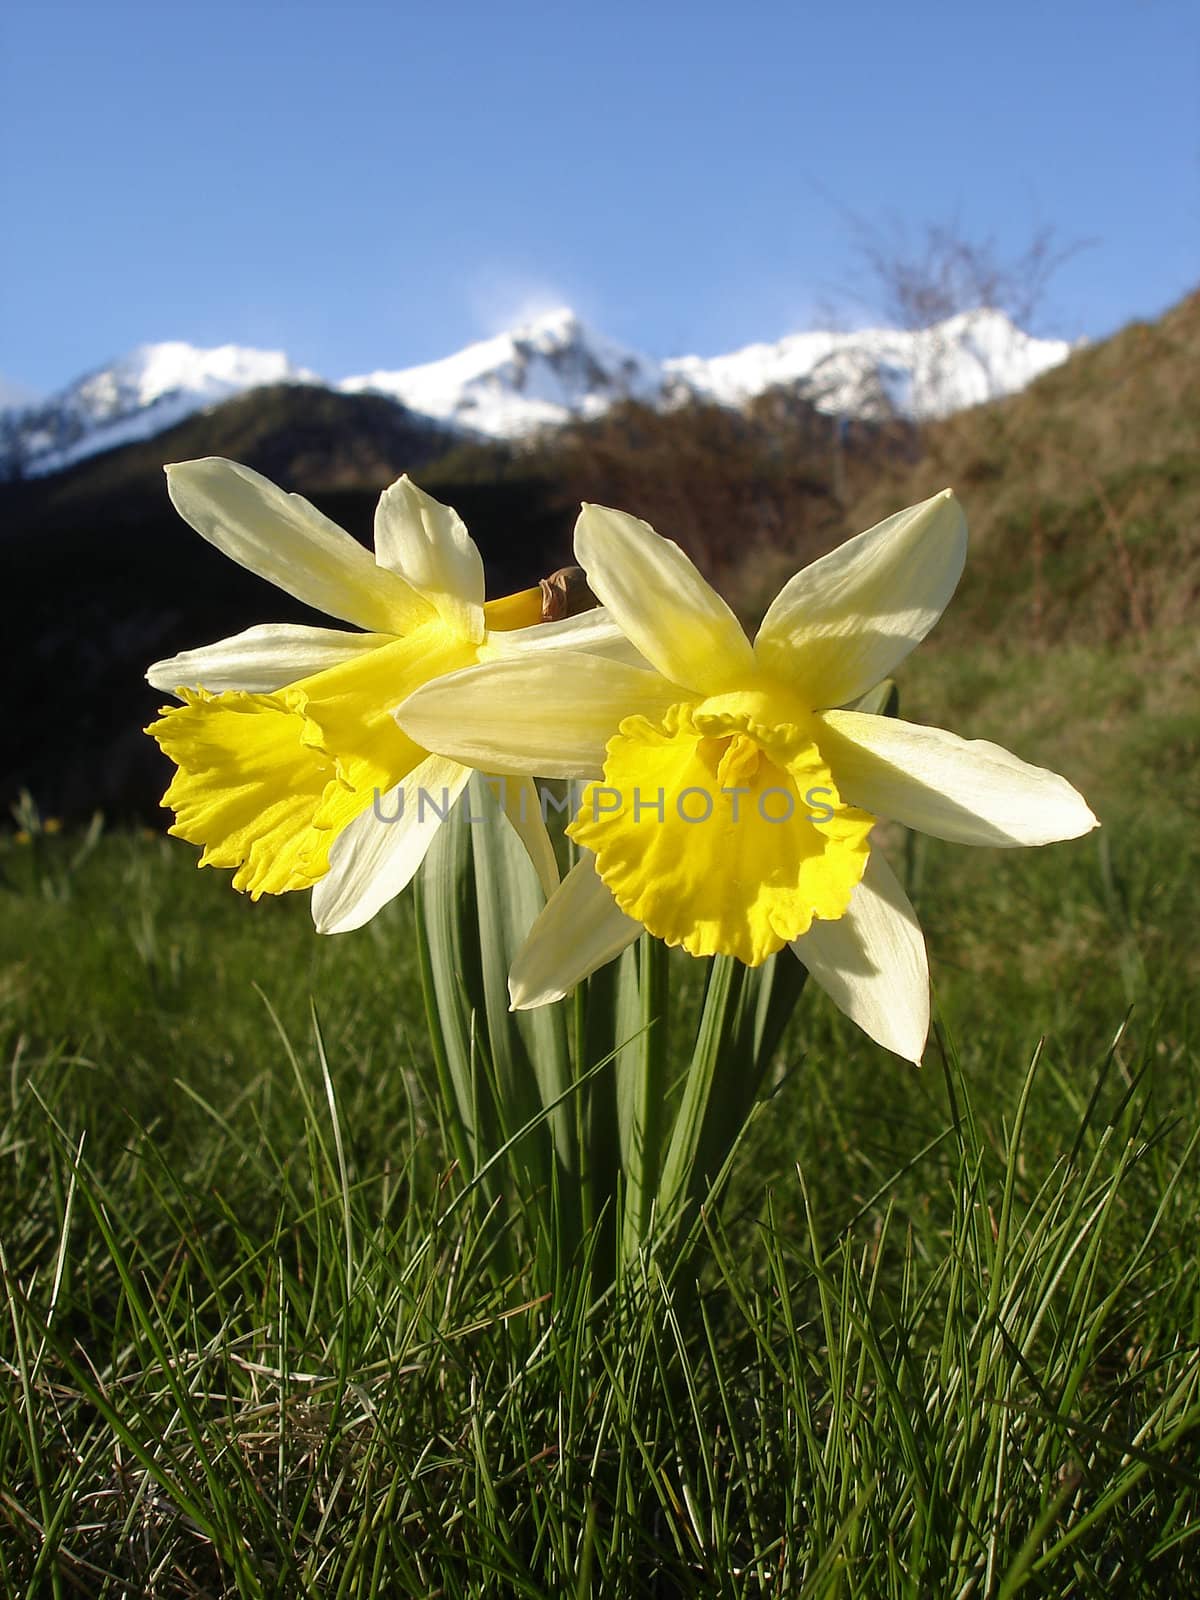 Narcissuses pseudonarcissus Spanish Pyrenees by mmgphoto